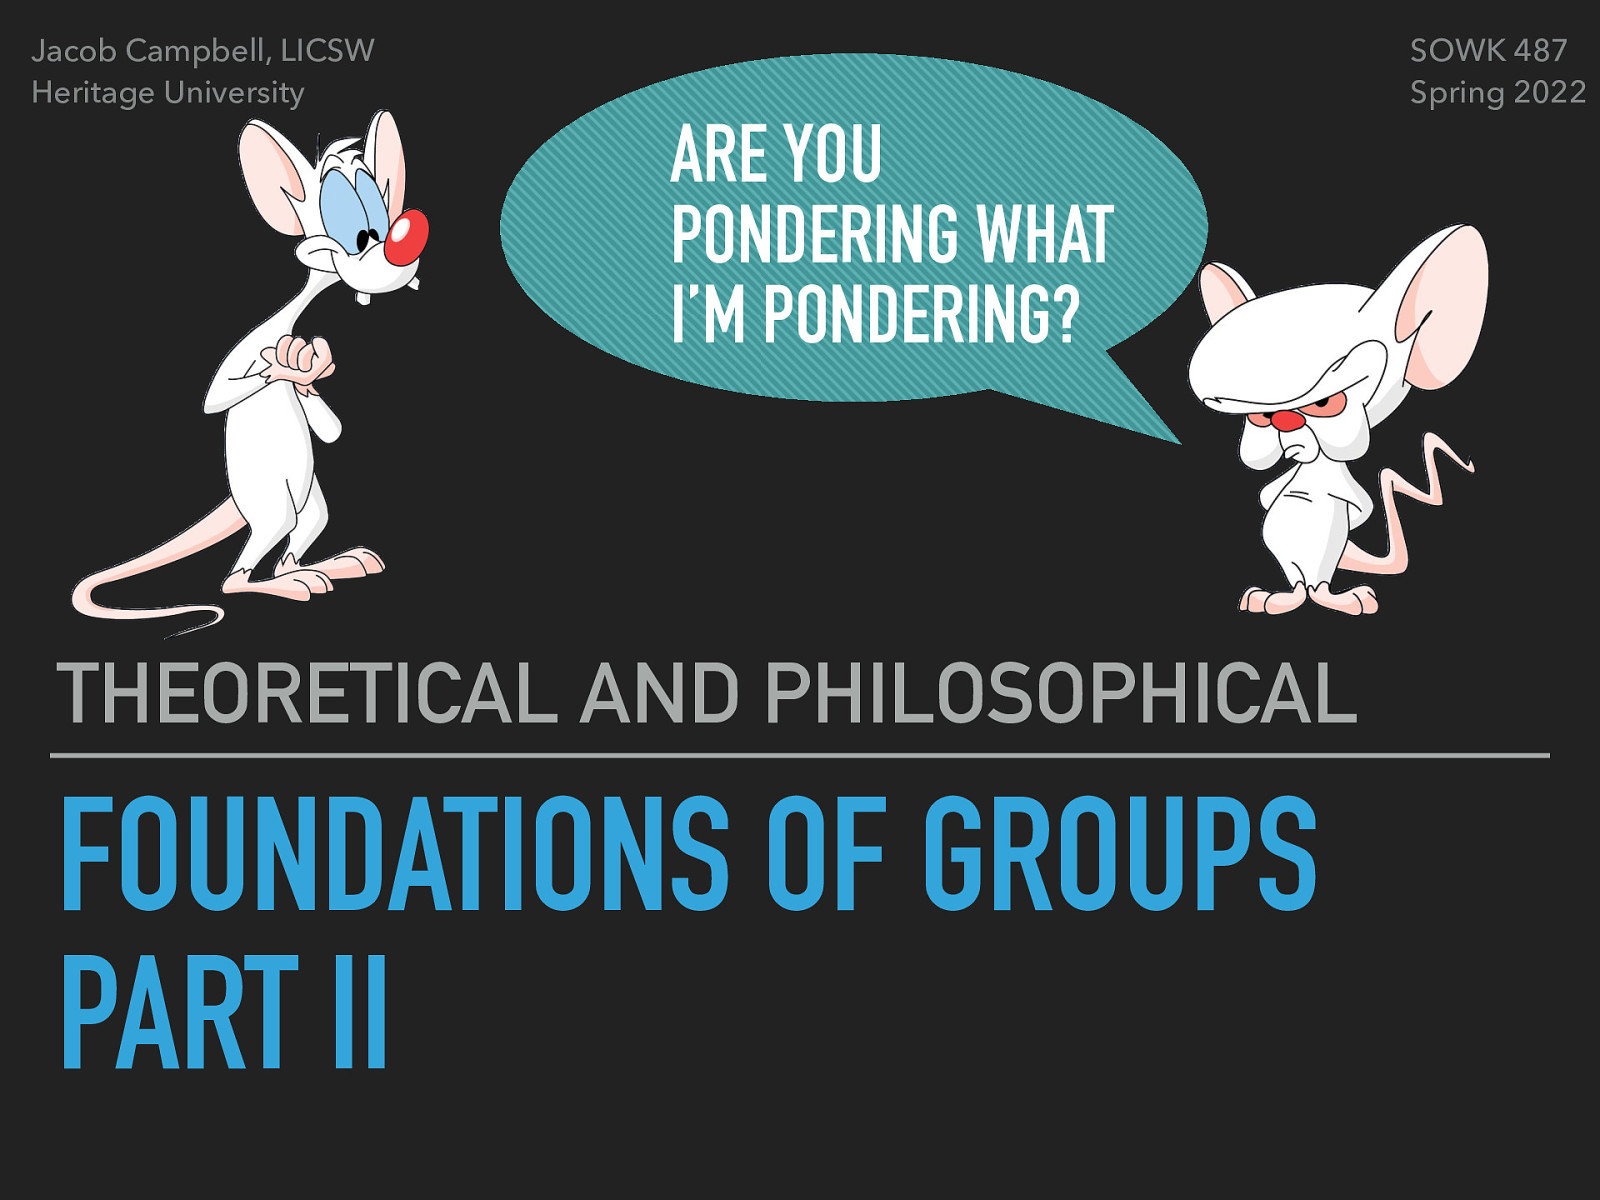 SOWK 487 Week 04 - Foundations for Groups Part II